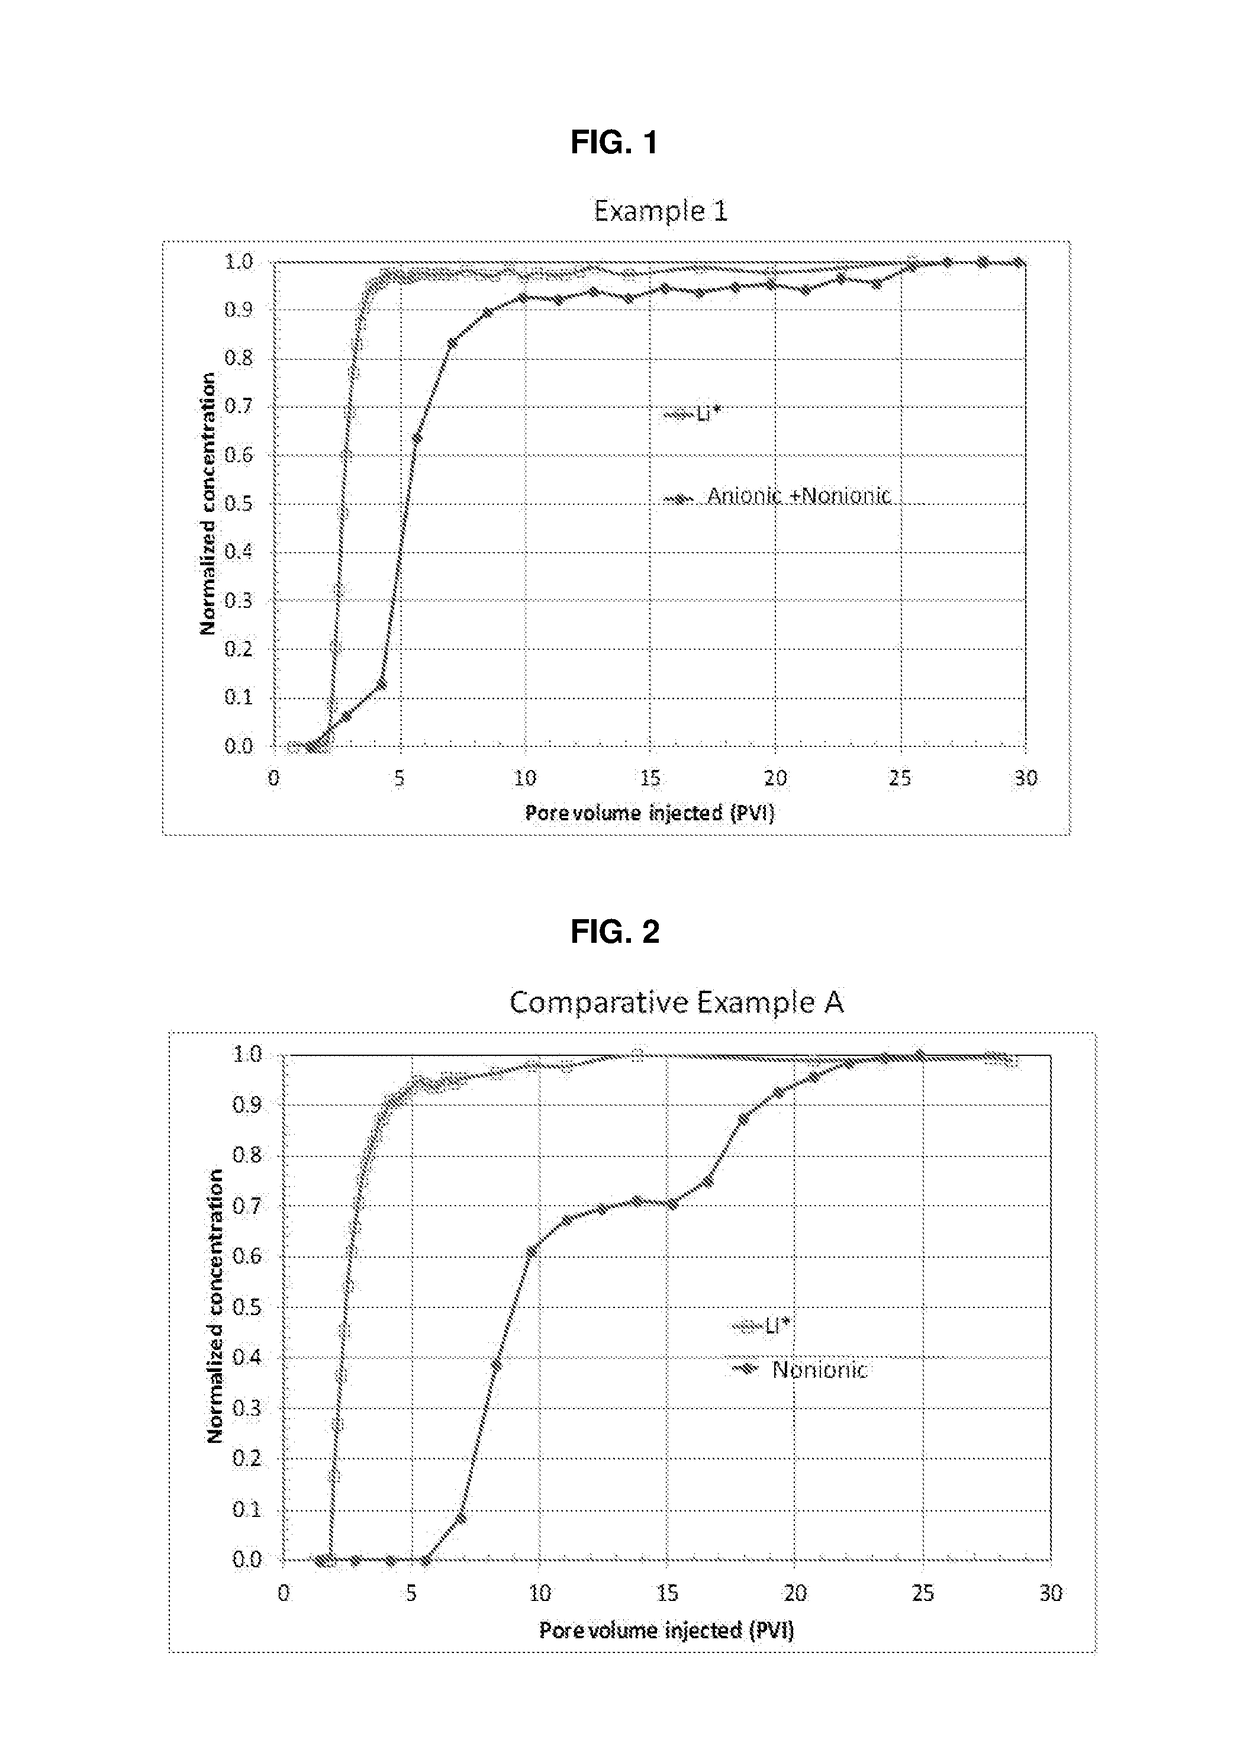 Co-surfactant foam-forming composition for enhanced oil recovery